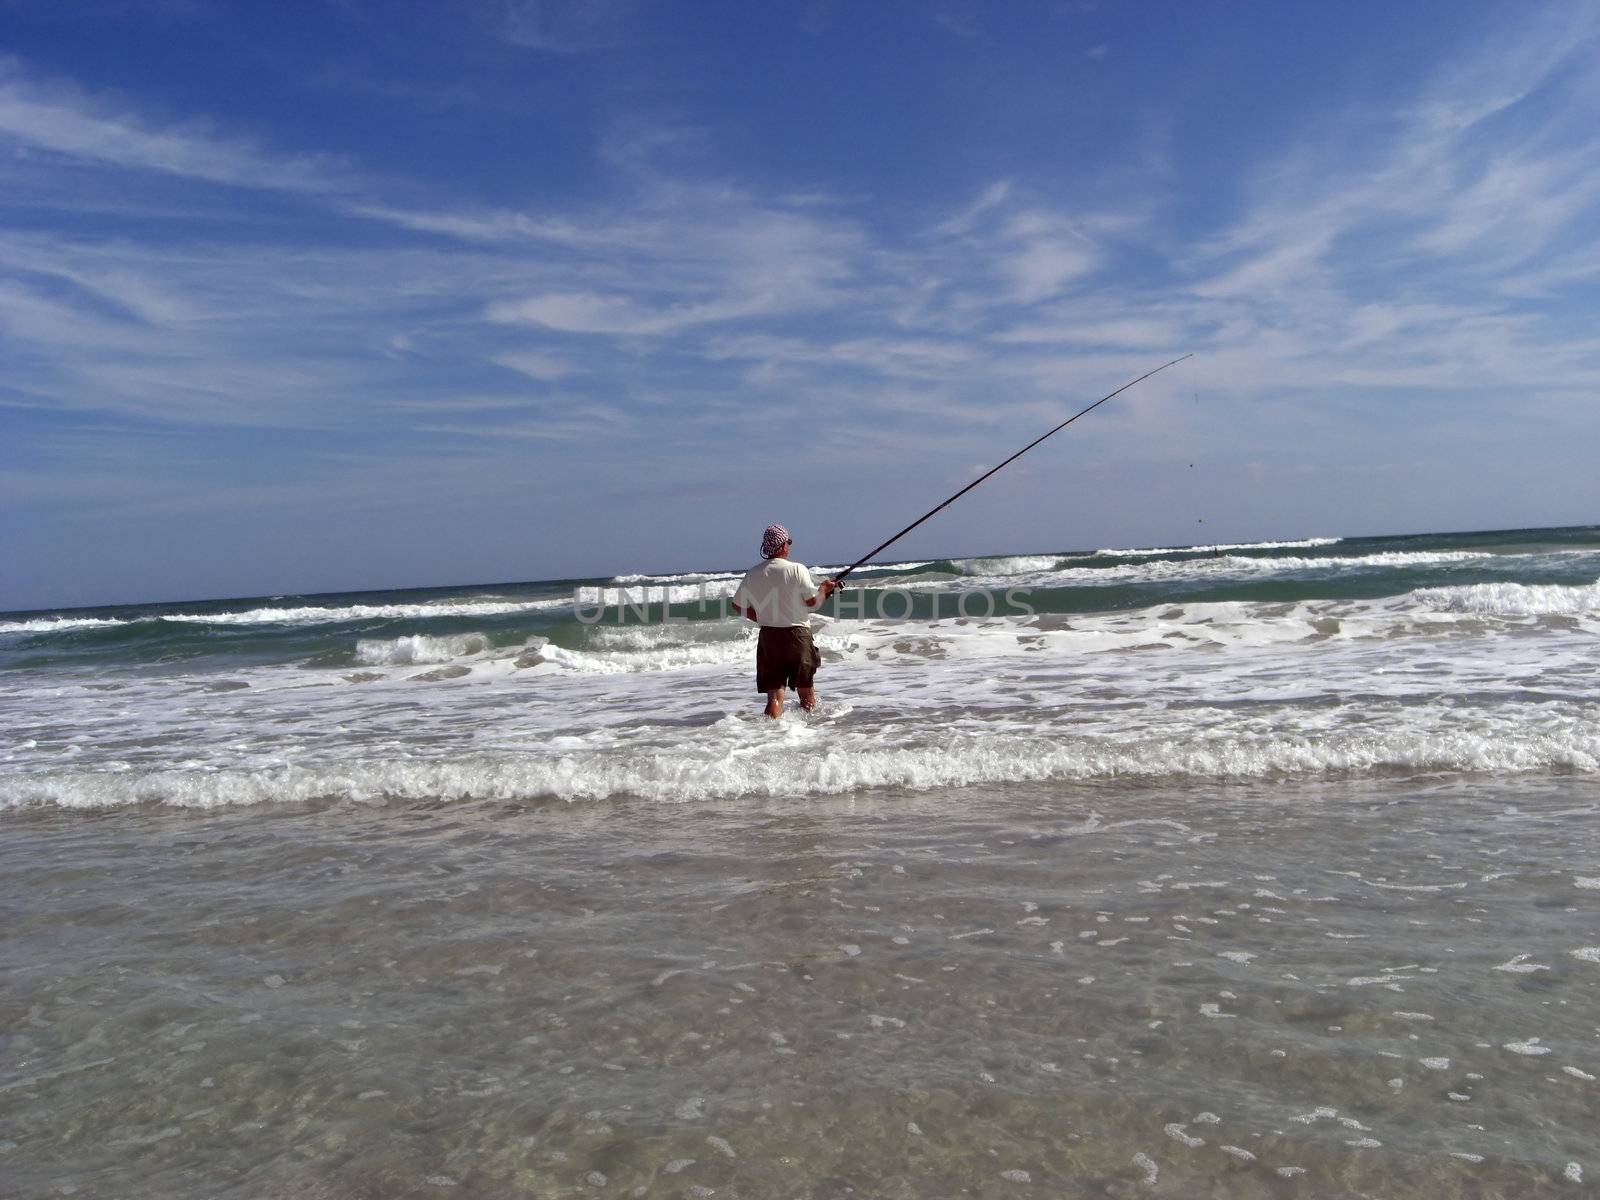 A man is holding a long fishing rod and is fishing for some Bass in a rough ocean.